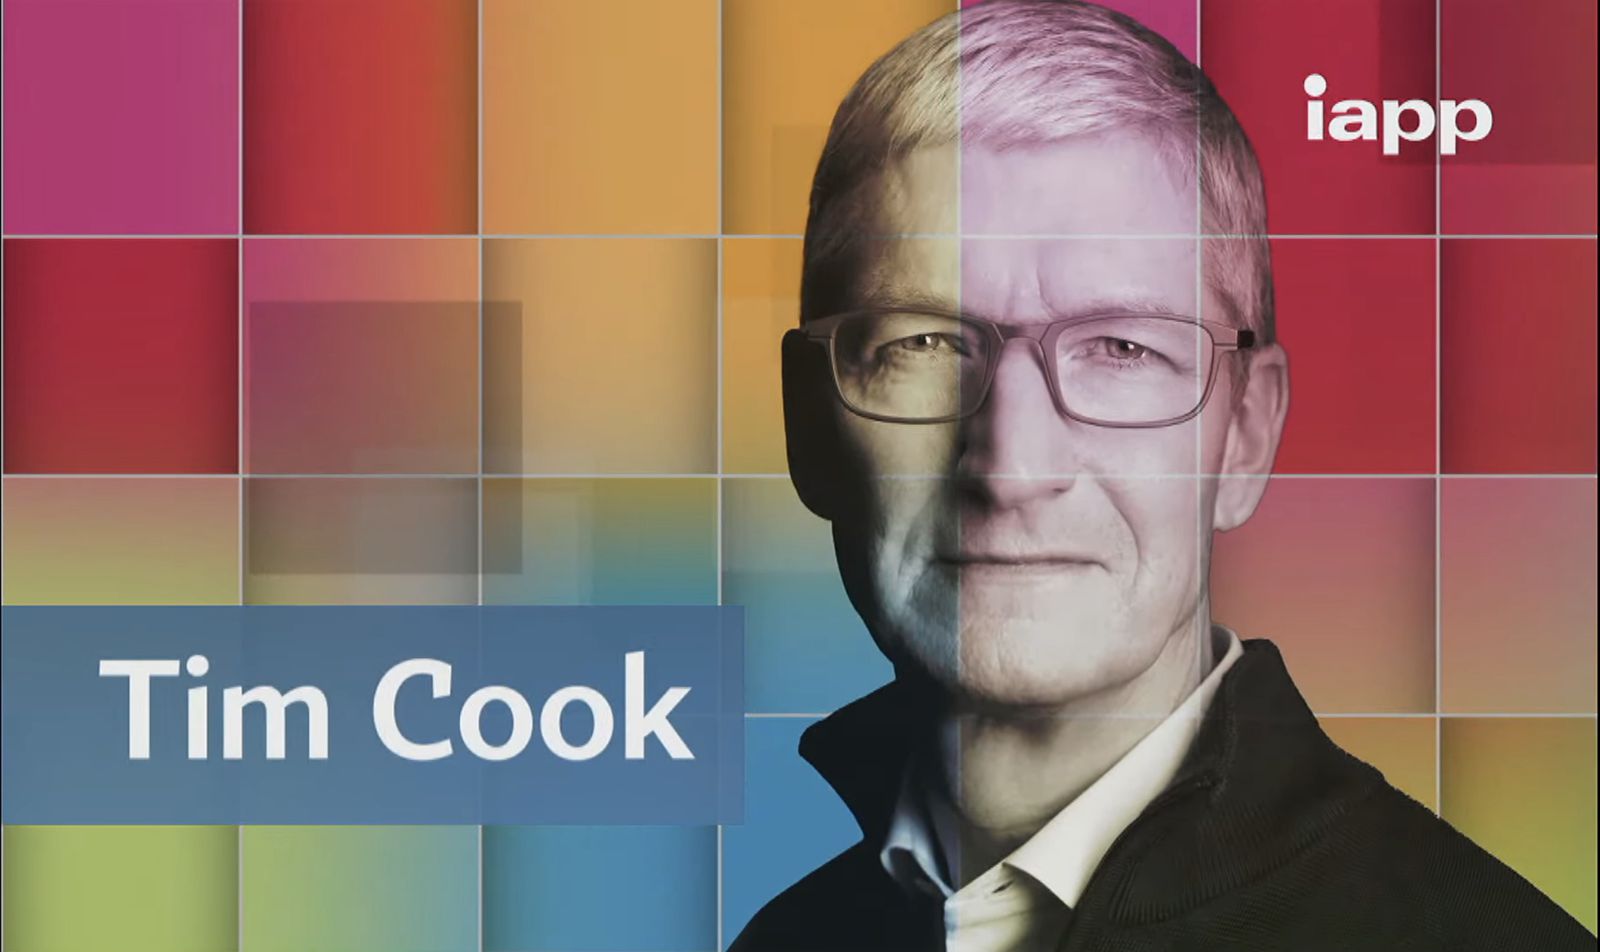 tim cook privacy iapp